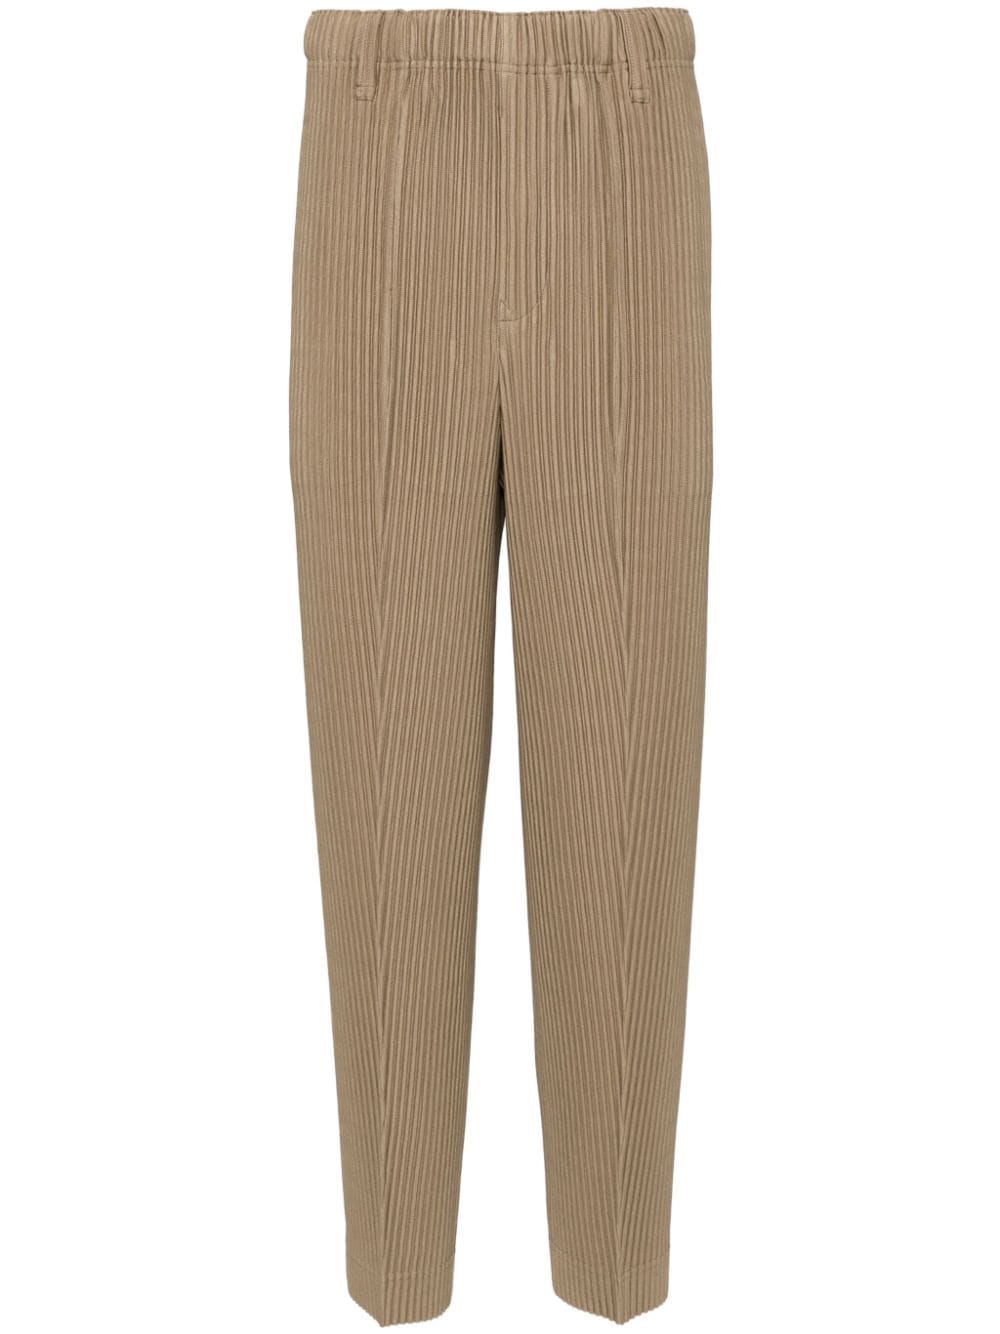 Image 1 of Homme Plissé Issey Miyake Compleat pleated trousers